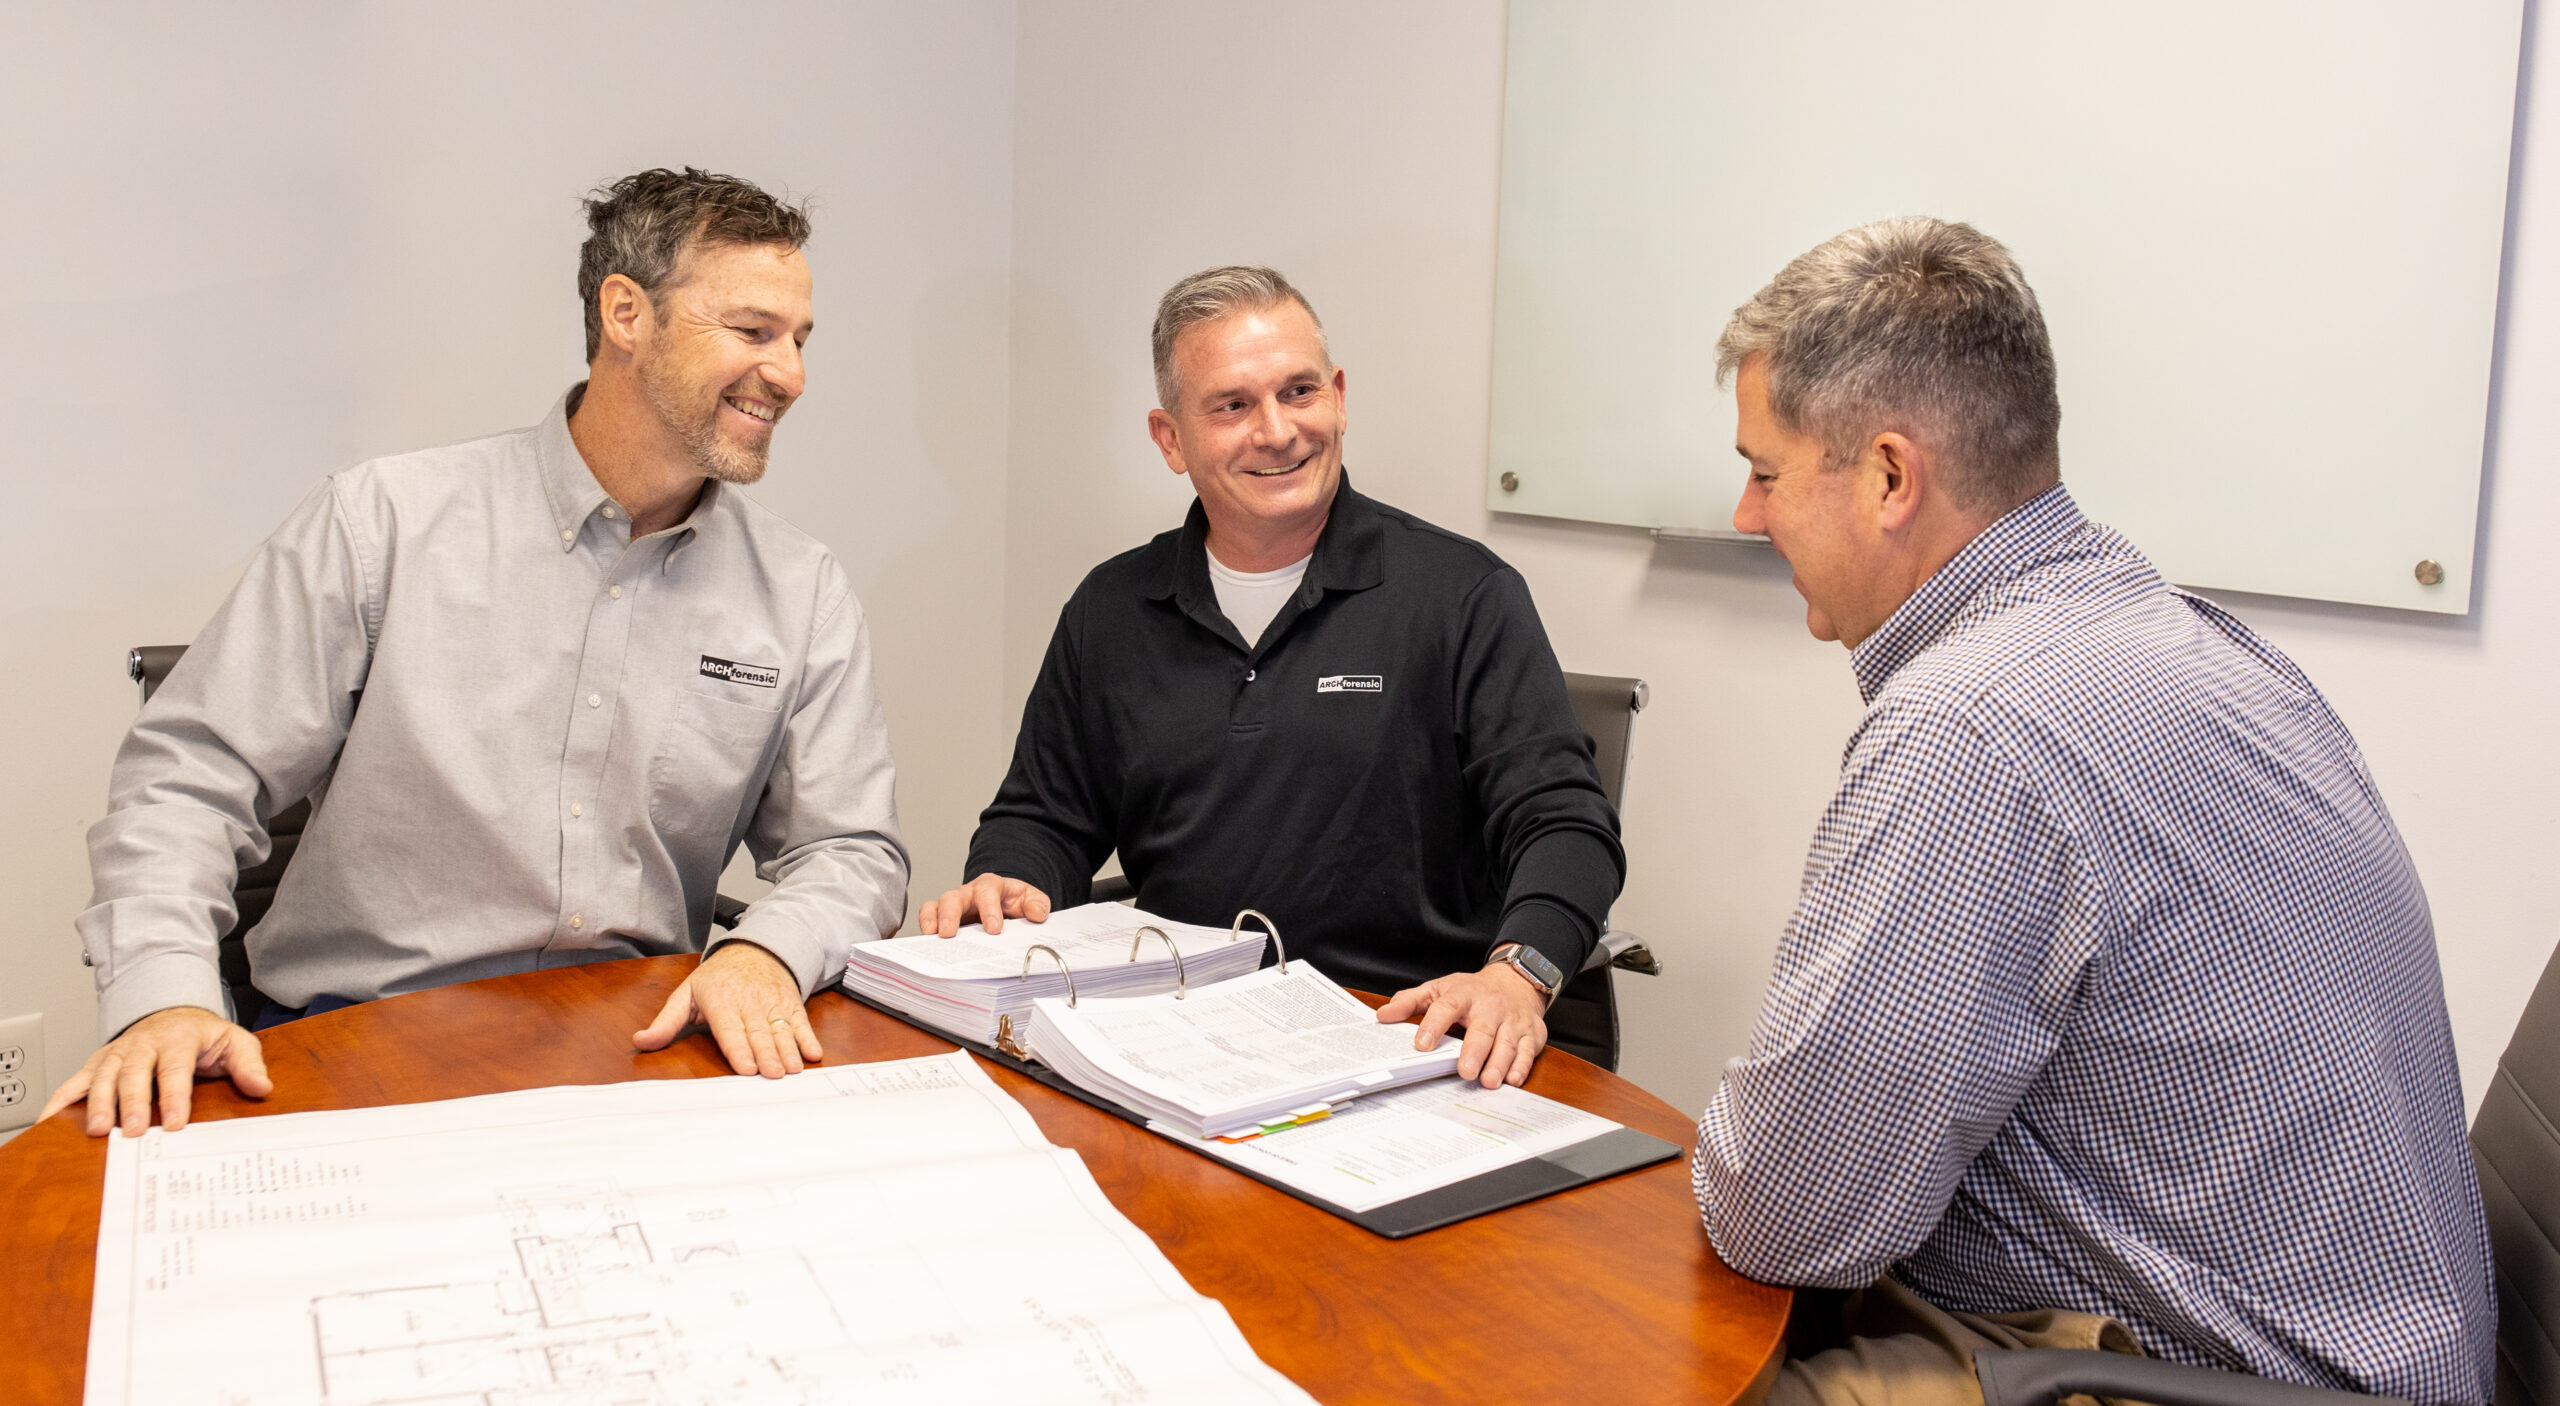 Christopher D. Ling, AIA, NCARB, Timothy P. Ronan, PE and Ken Warman reviewing architectural drawings and construction documentation in the office